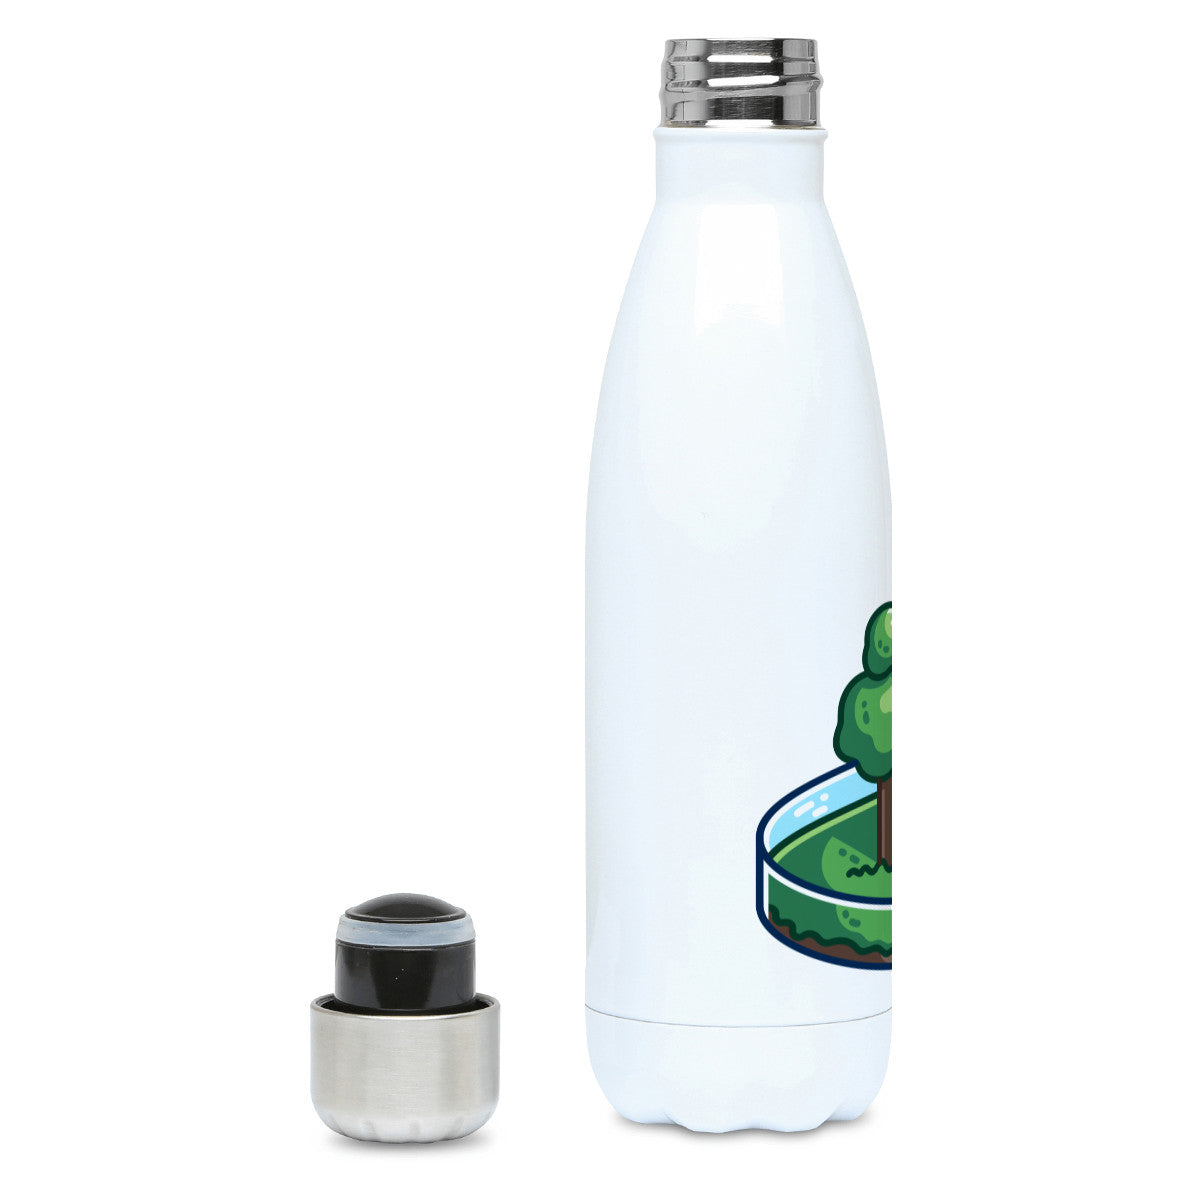 A tall white stainless steel drinks bottle seen side on with its lid off and screw neck visible and the edge of the design showing.